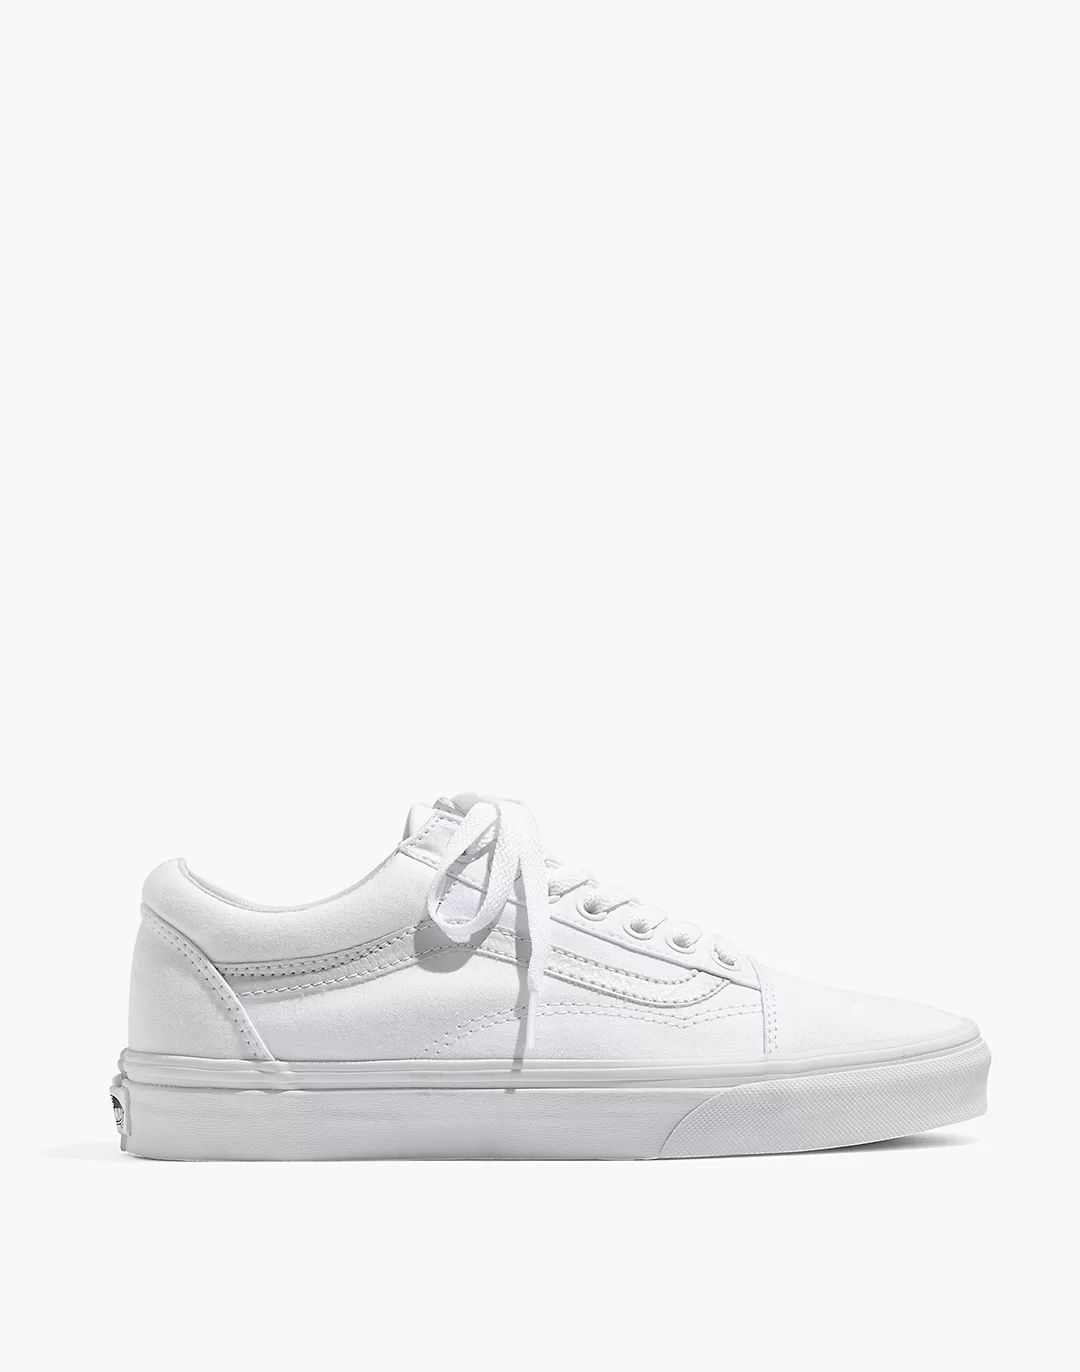 Vans® Unisex Old Skool Lace-Up Sneakers in Canvas and Suede | Madewell